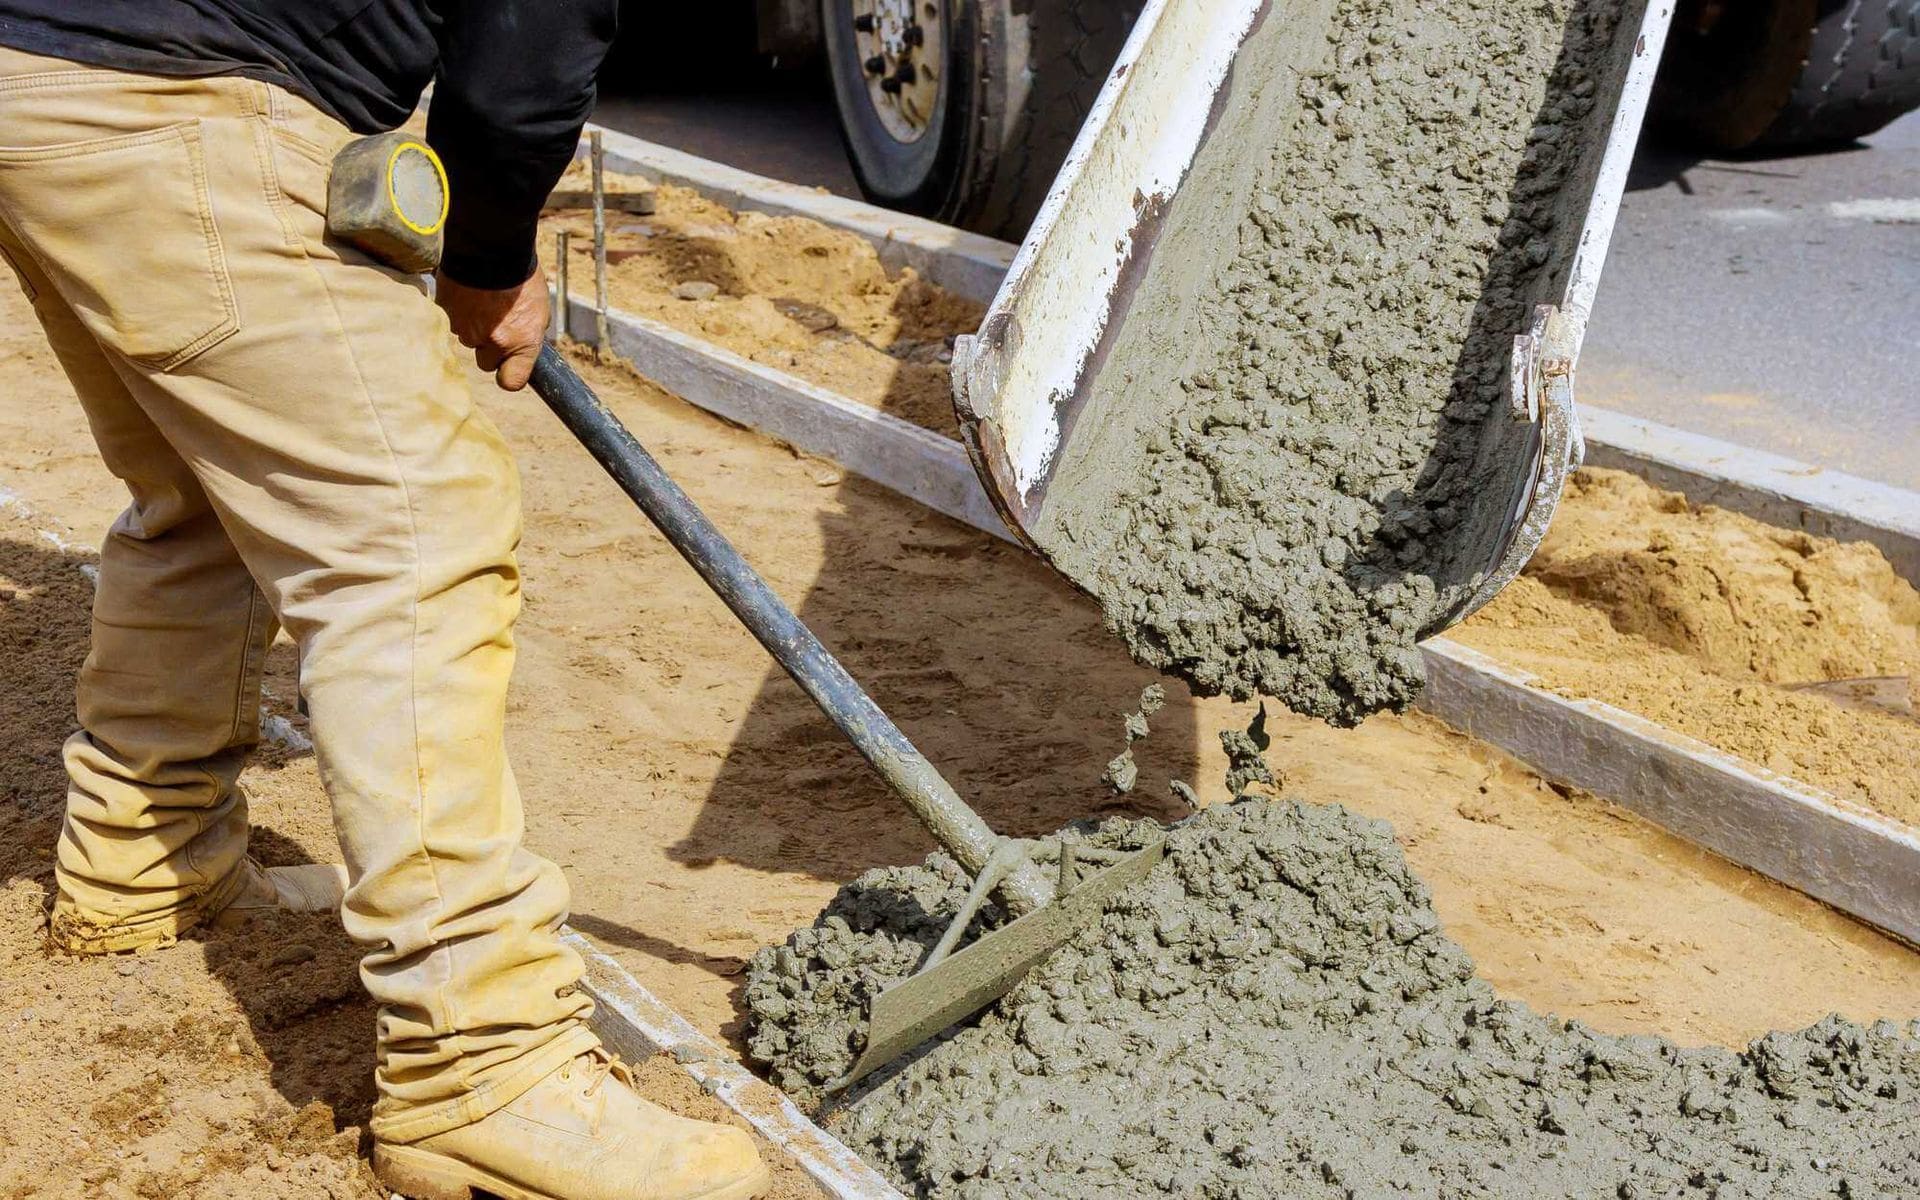 A construction worker wearing beige pants and boots is spreading fresh concrete with a rake. The concrete is being poured from a chute into a rectangular formwork on the ground. Sand surrounds the work area as skilled concrete contractors in Buckeye, AZ ensure flawless application, possibly for decorative concrete.